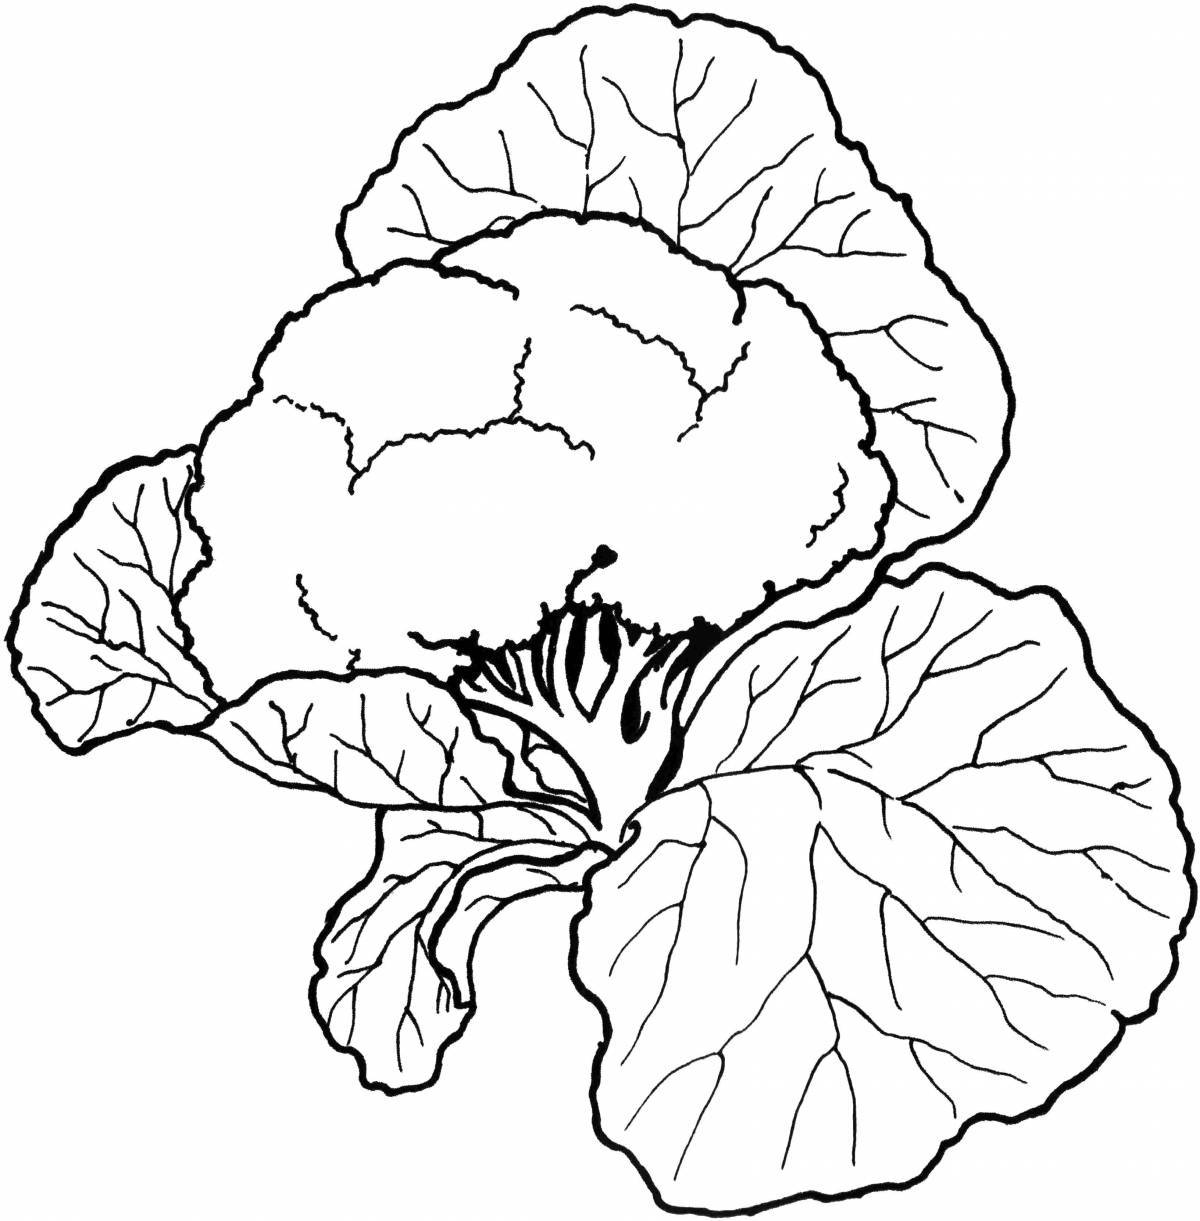 Coloring cabbage explosion coloring book for kids